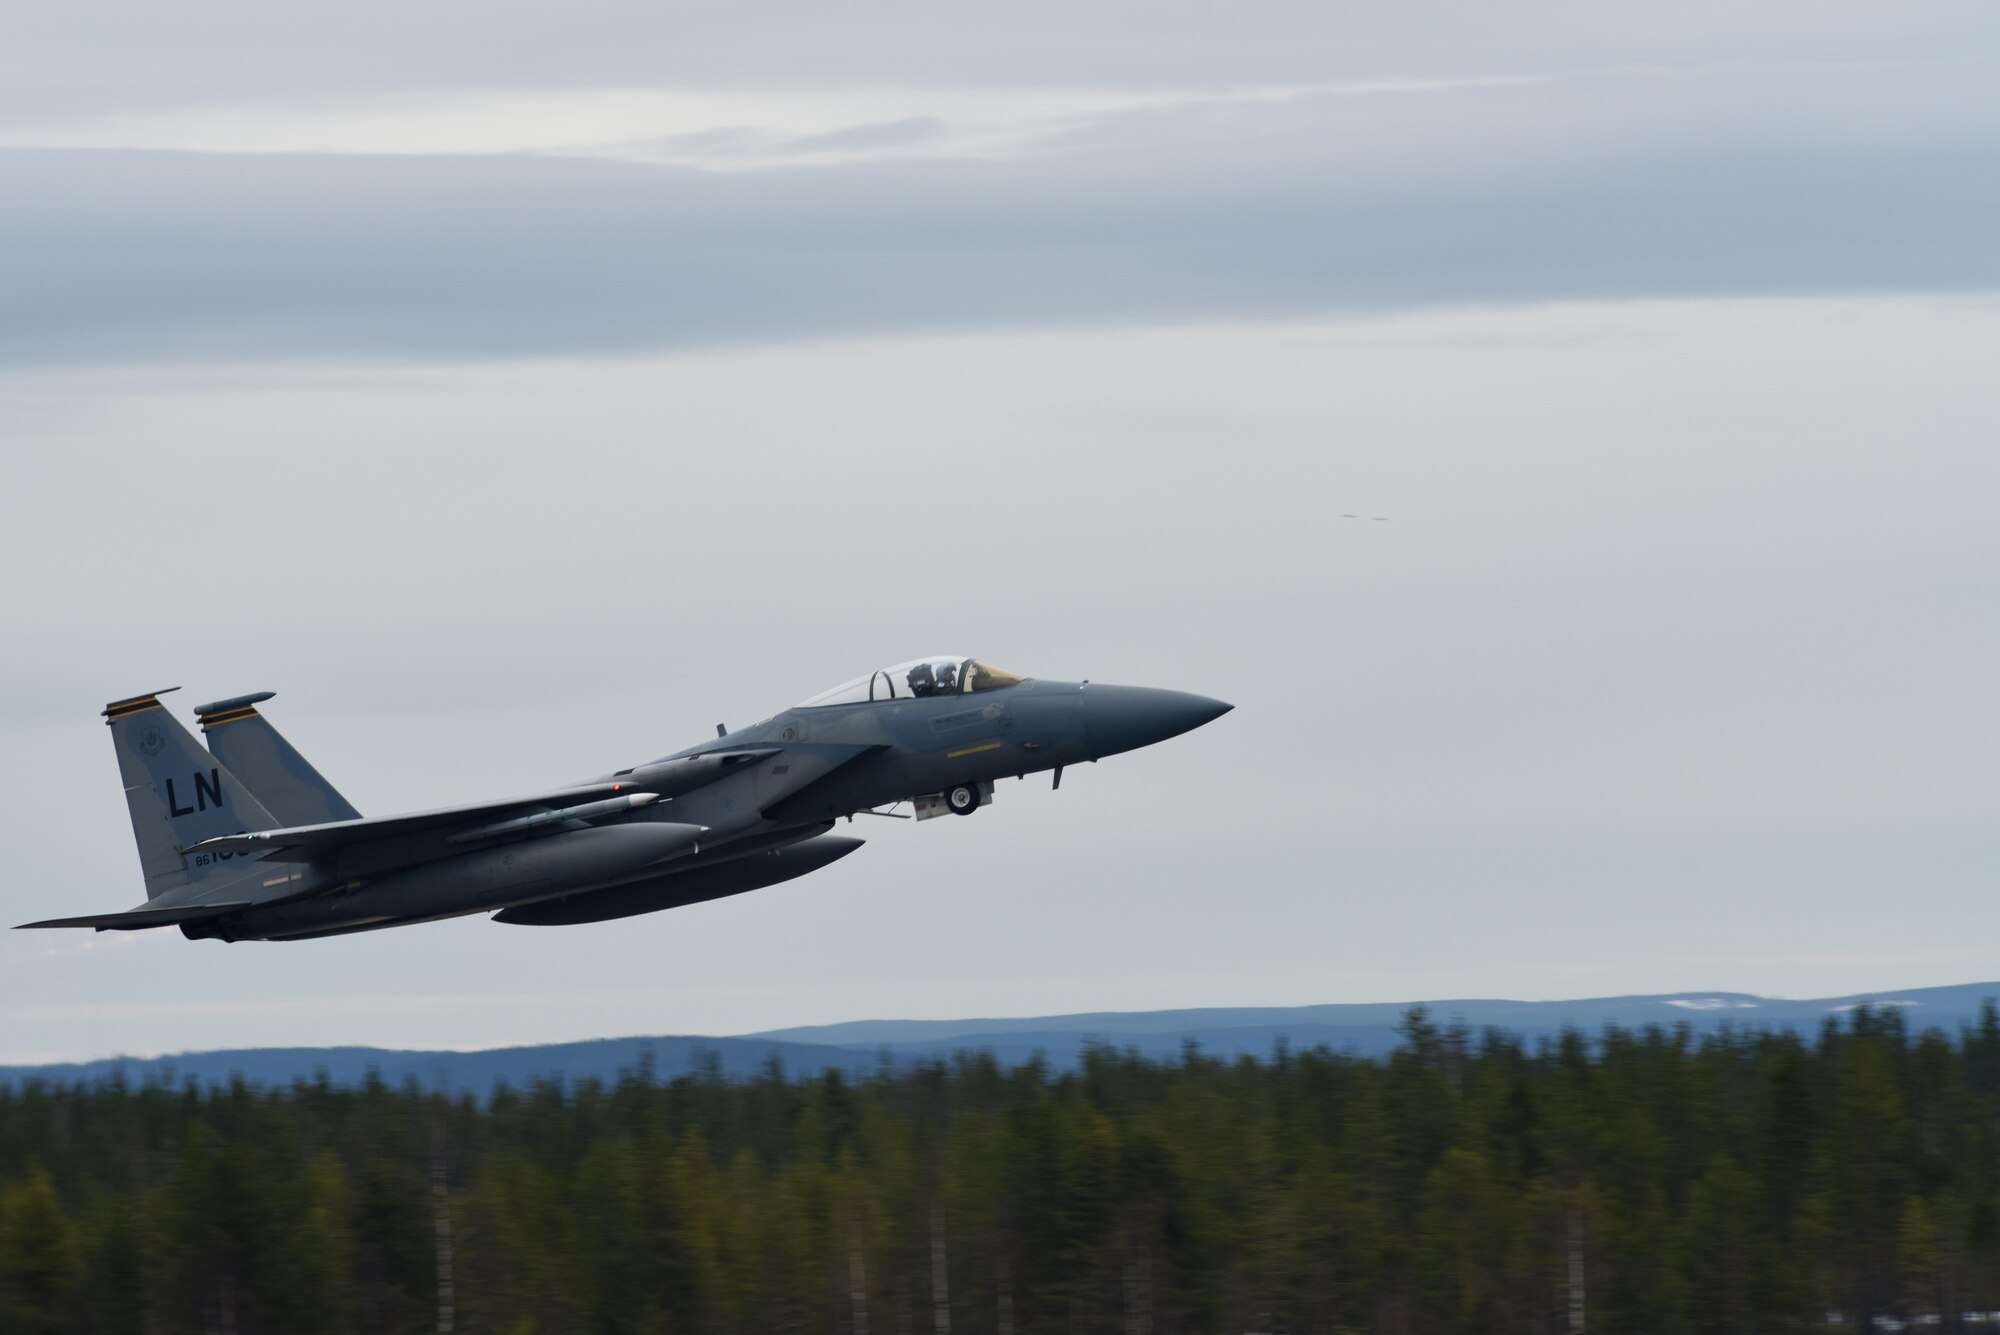 A 493rd Fighter Squadron F-15C Eagle from the 48th Fighter Wing at Royal Air Force Lakenheath, England, takes off at Rovaniemi Air Base, Finland, May 22, in support of Arctic Challenge 2017. Exercises such as ACE 17 help improve the ability of participating nations' armed forces to collectively conduct the full spectrum of military operations. (U.S. Air Force photo/Airman 1st Class Abby L. Finkel)